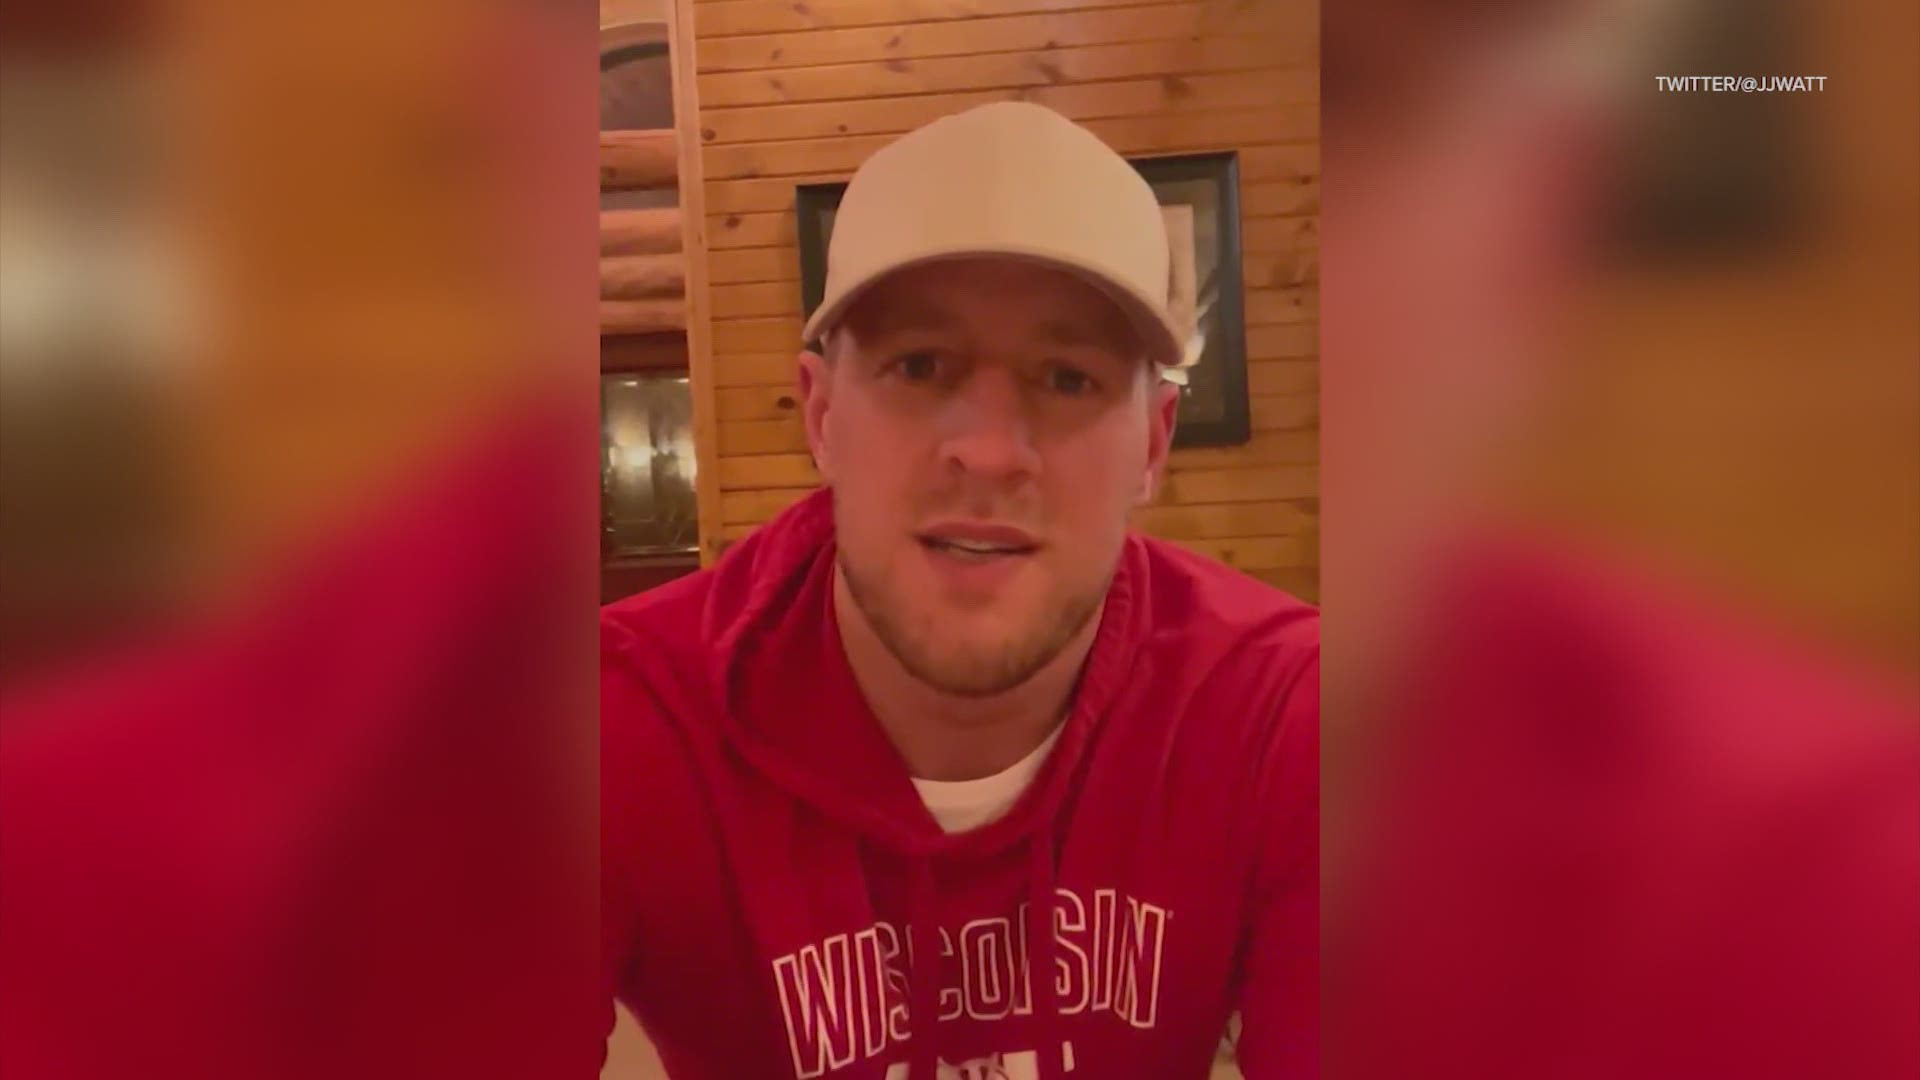 In an emotional message to the people of Houston, J.J. Watt said he is leaving the city he's grown to love because it's time to move on.